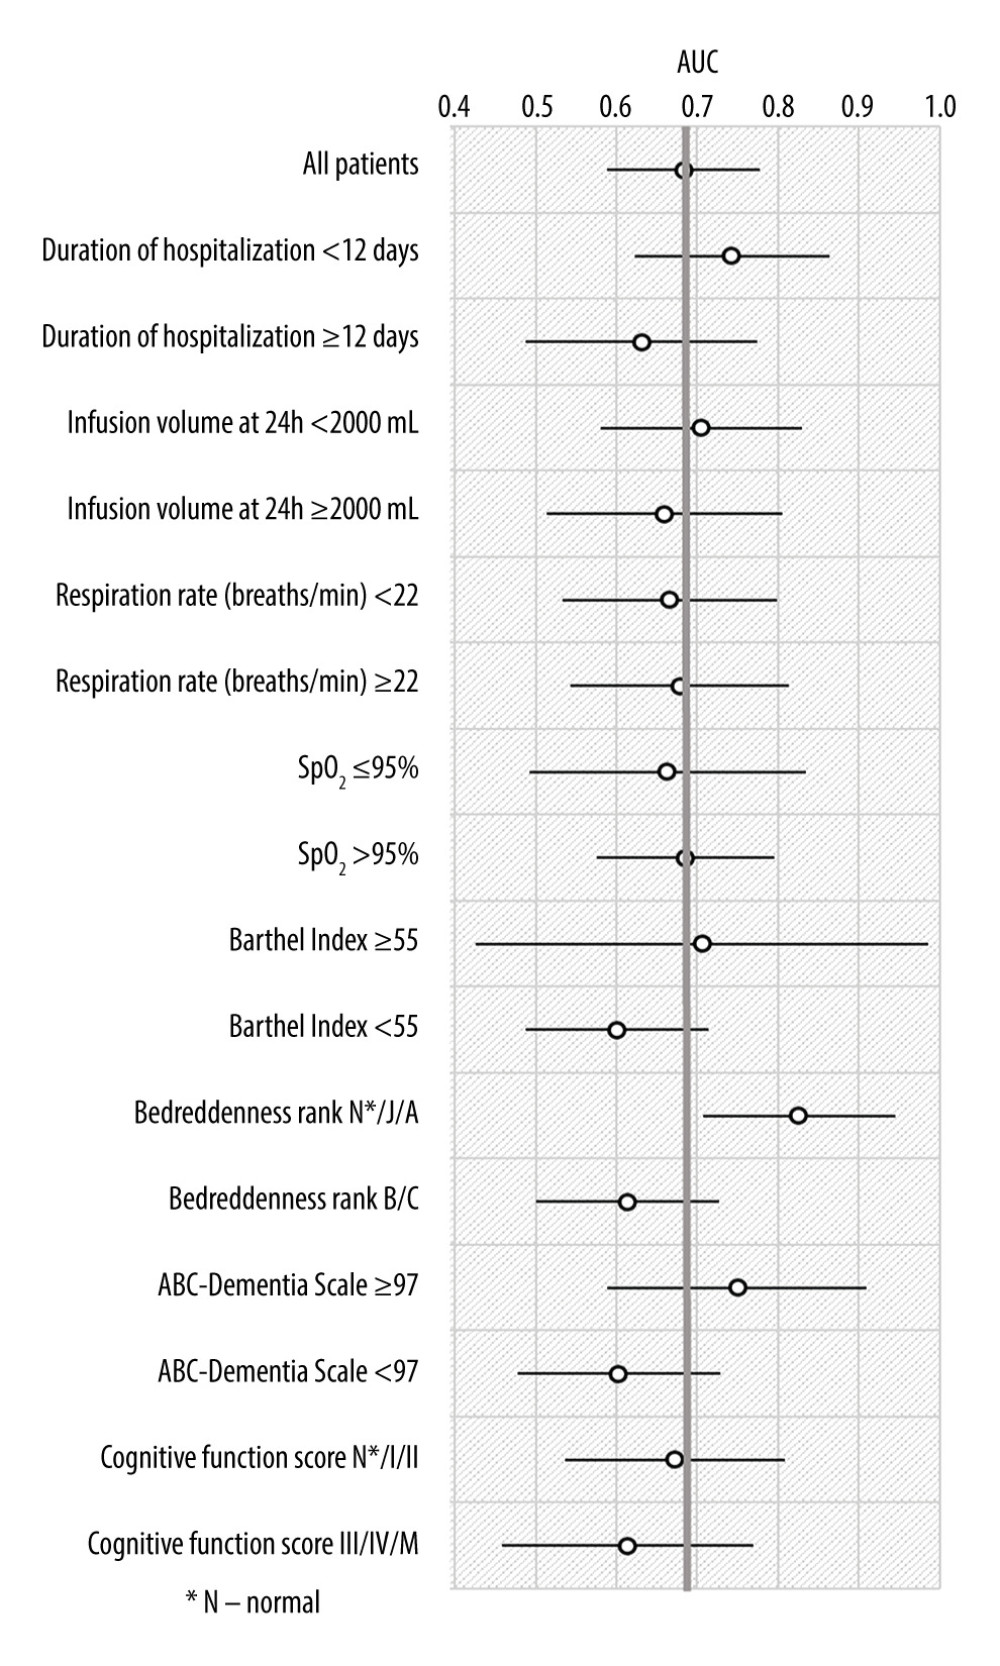 Subgroup analysis.Area under the receiver operating characteristic curve (AUC) of the predictive formula was higher than 0.7 in patients with duration of hospitalization shorter than the median of 12 days; fluid infusion less than 2000 mL within 24 hours; Barthel Index of the median 55 or higher; Bedriddenness ranks of normal, J, or A; and ABC Dementia Scale of the median 97 or higher. SpO2 – oxygen saturation. Microsoft® PowerPoint® for Microsoft 365 MSO (version 2208 build 16.0.15601.20148) was used to create this figure.